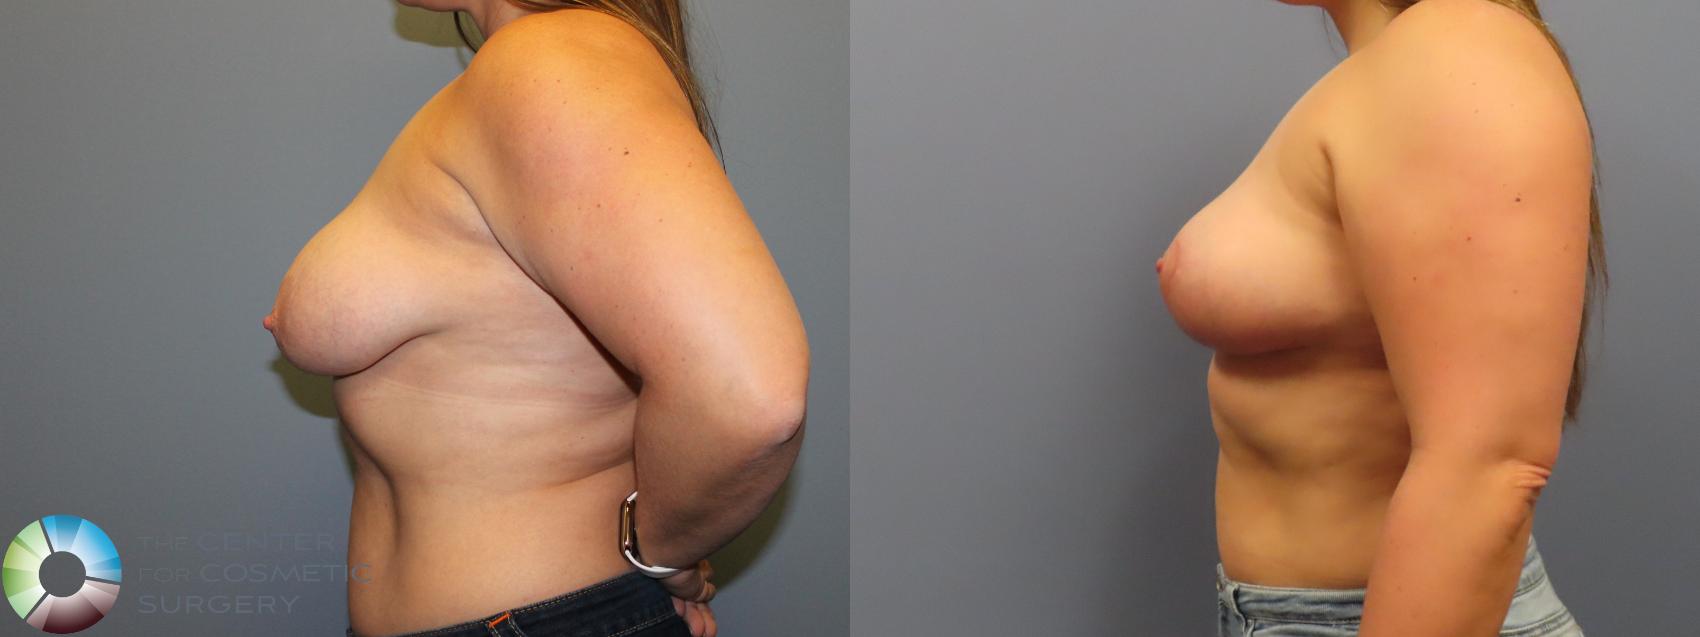 Before & After Breast Lift Case 11974 Left Side in Denver and Colorado Springs, CO